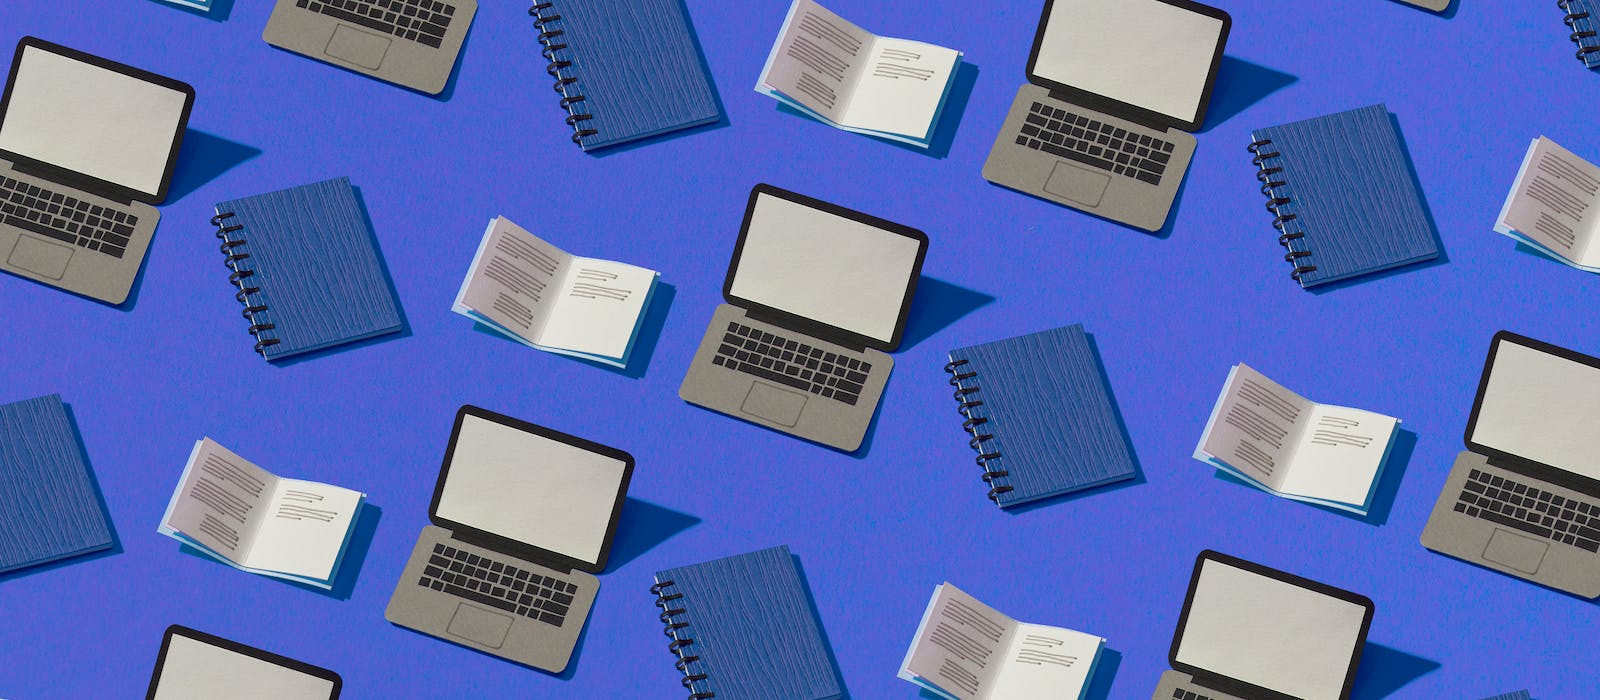 Multiple drawings of a open grey laptop, closed blue notebooks and open notebooks with black lines simulating text, interspersed on a blue background.